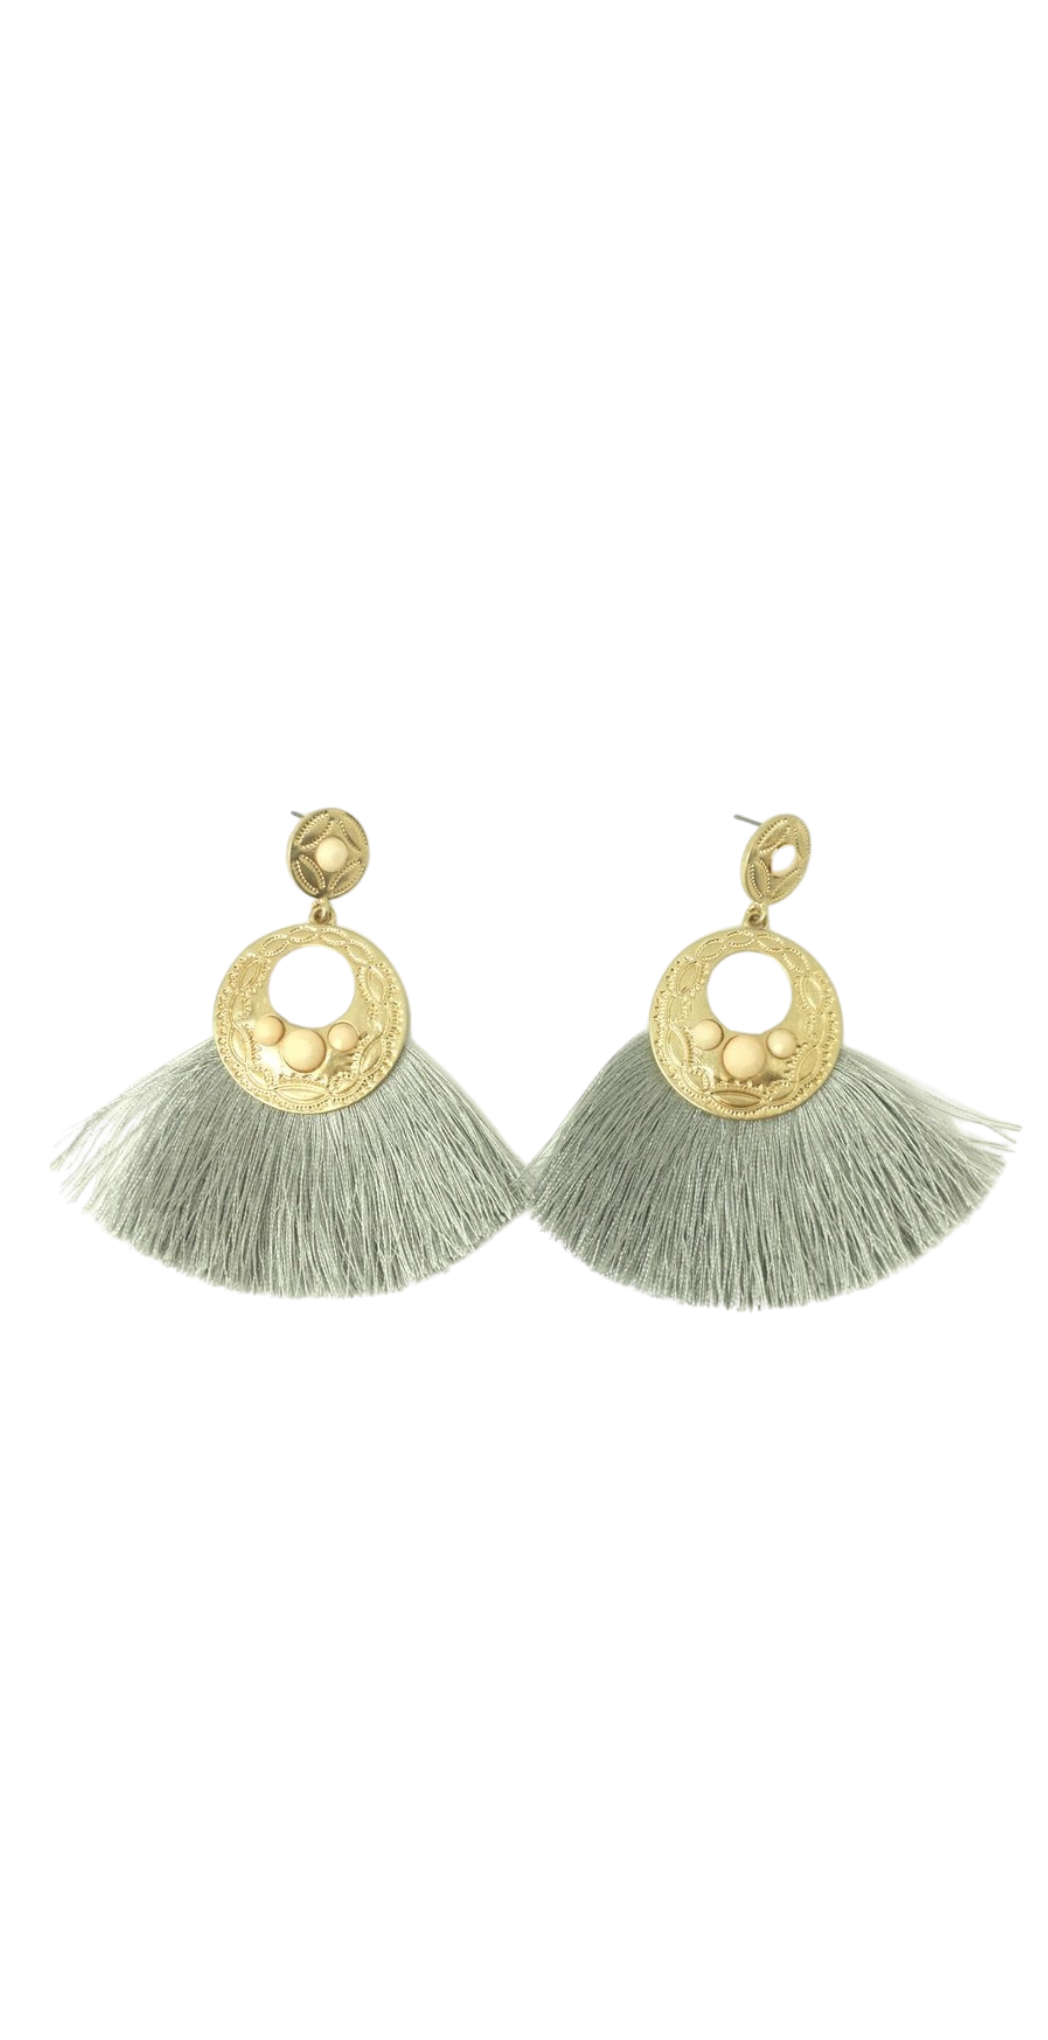 Gold Earrings with Pink Gems and Grey Fringe - The Fashion Foundation - {{ discount designer}}